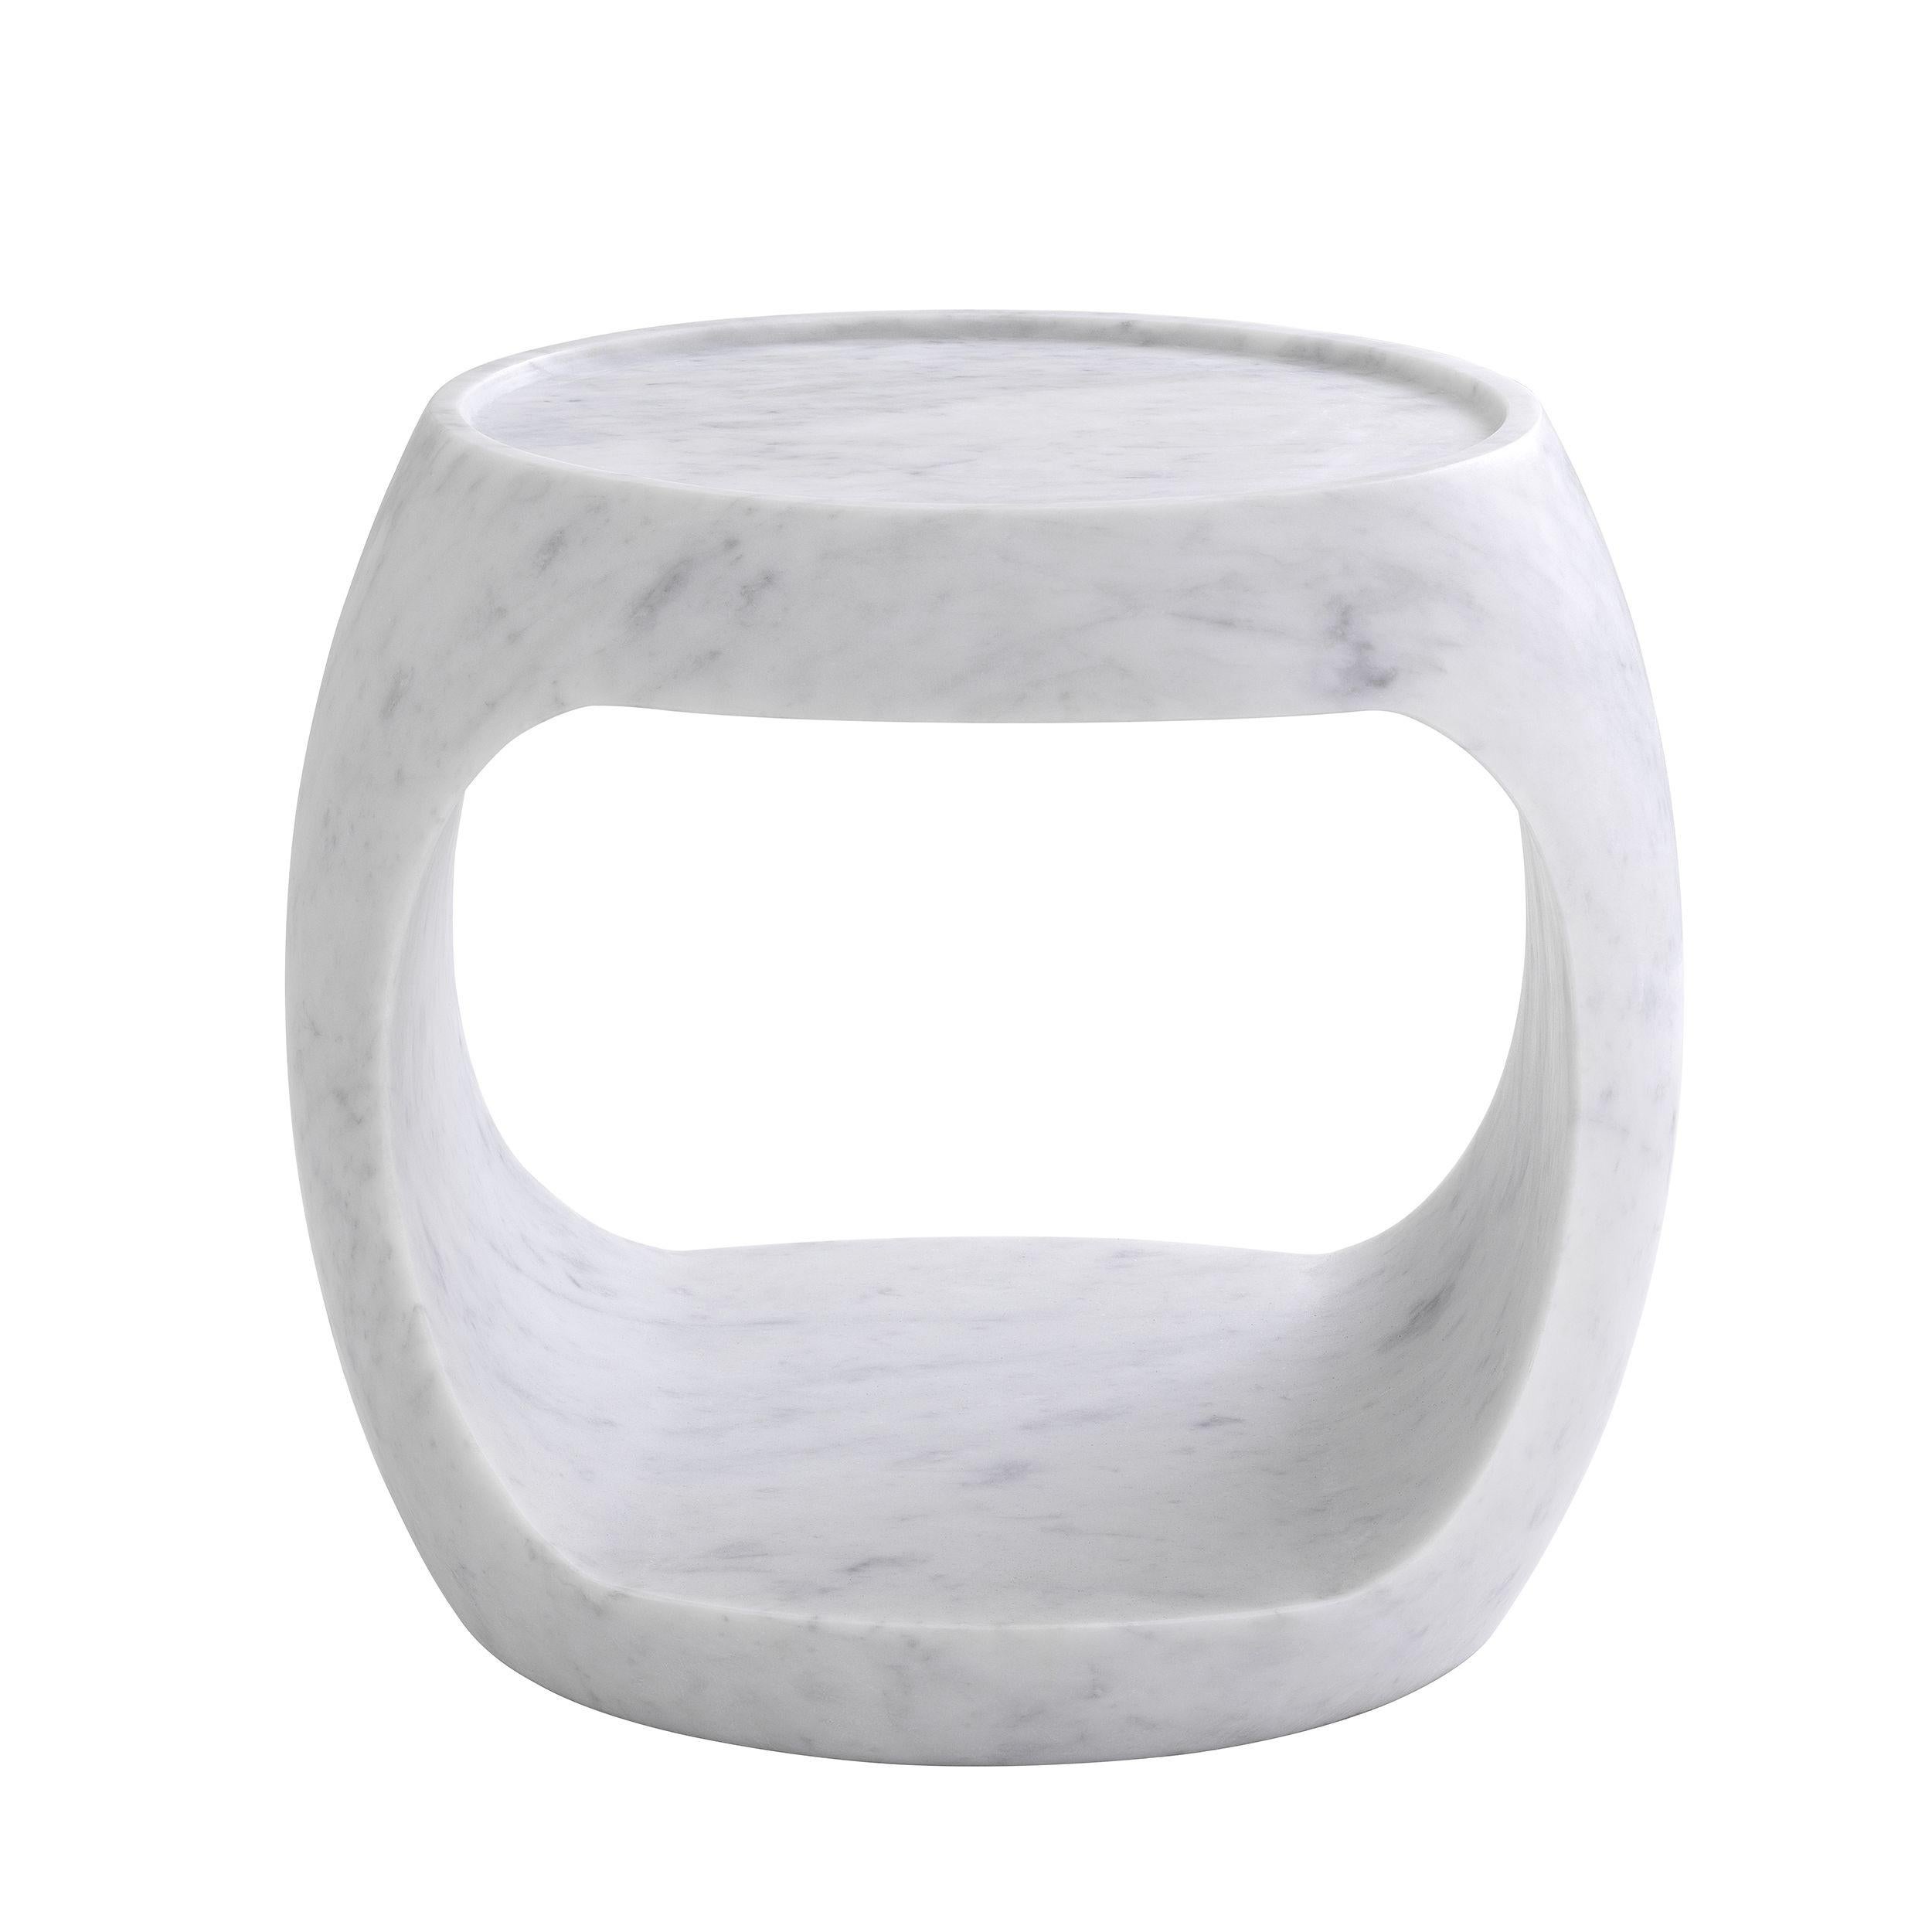 Modern 21st Century Curved Open Oval Carved Block Low White Carrera Marble Side Table